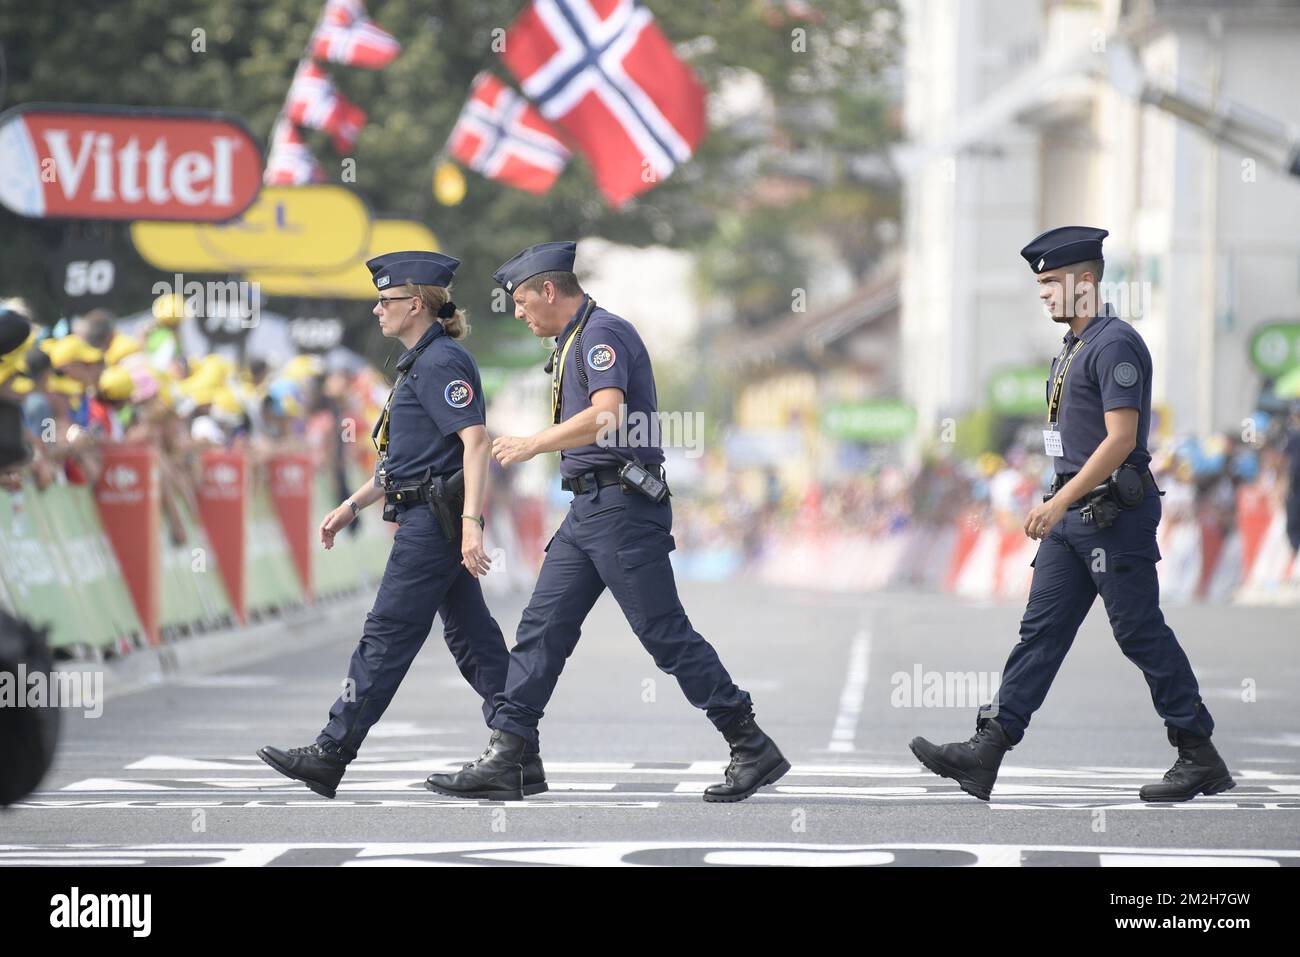 Police pictured at the finish of the 18th stage of the 105th edition of the Tour de France cycling race, 171km from Trie-sur-Baise to Pau, France, Thursday 26 July 2018. This year's Tour de France takes place from July 7th to July 29th. BELGA PHOTO YORICK JANSENS  Stockfoto